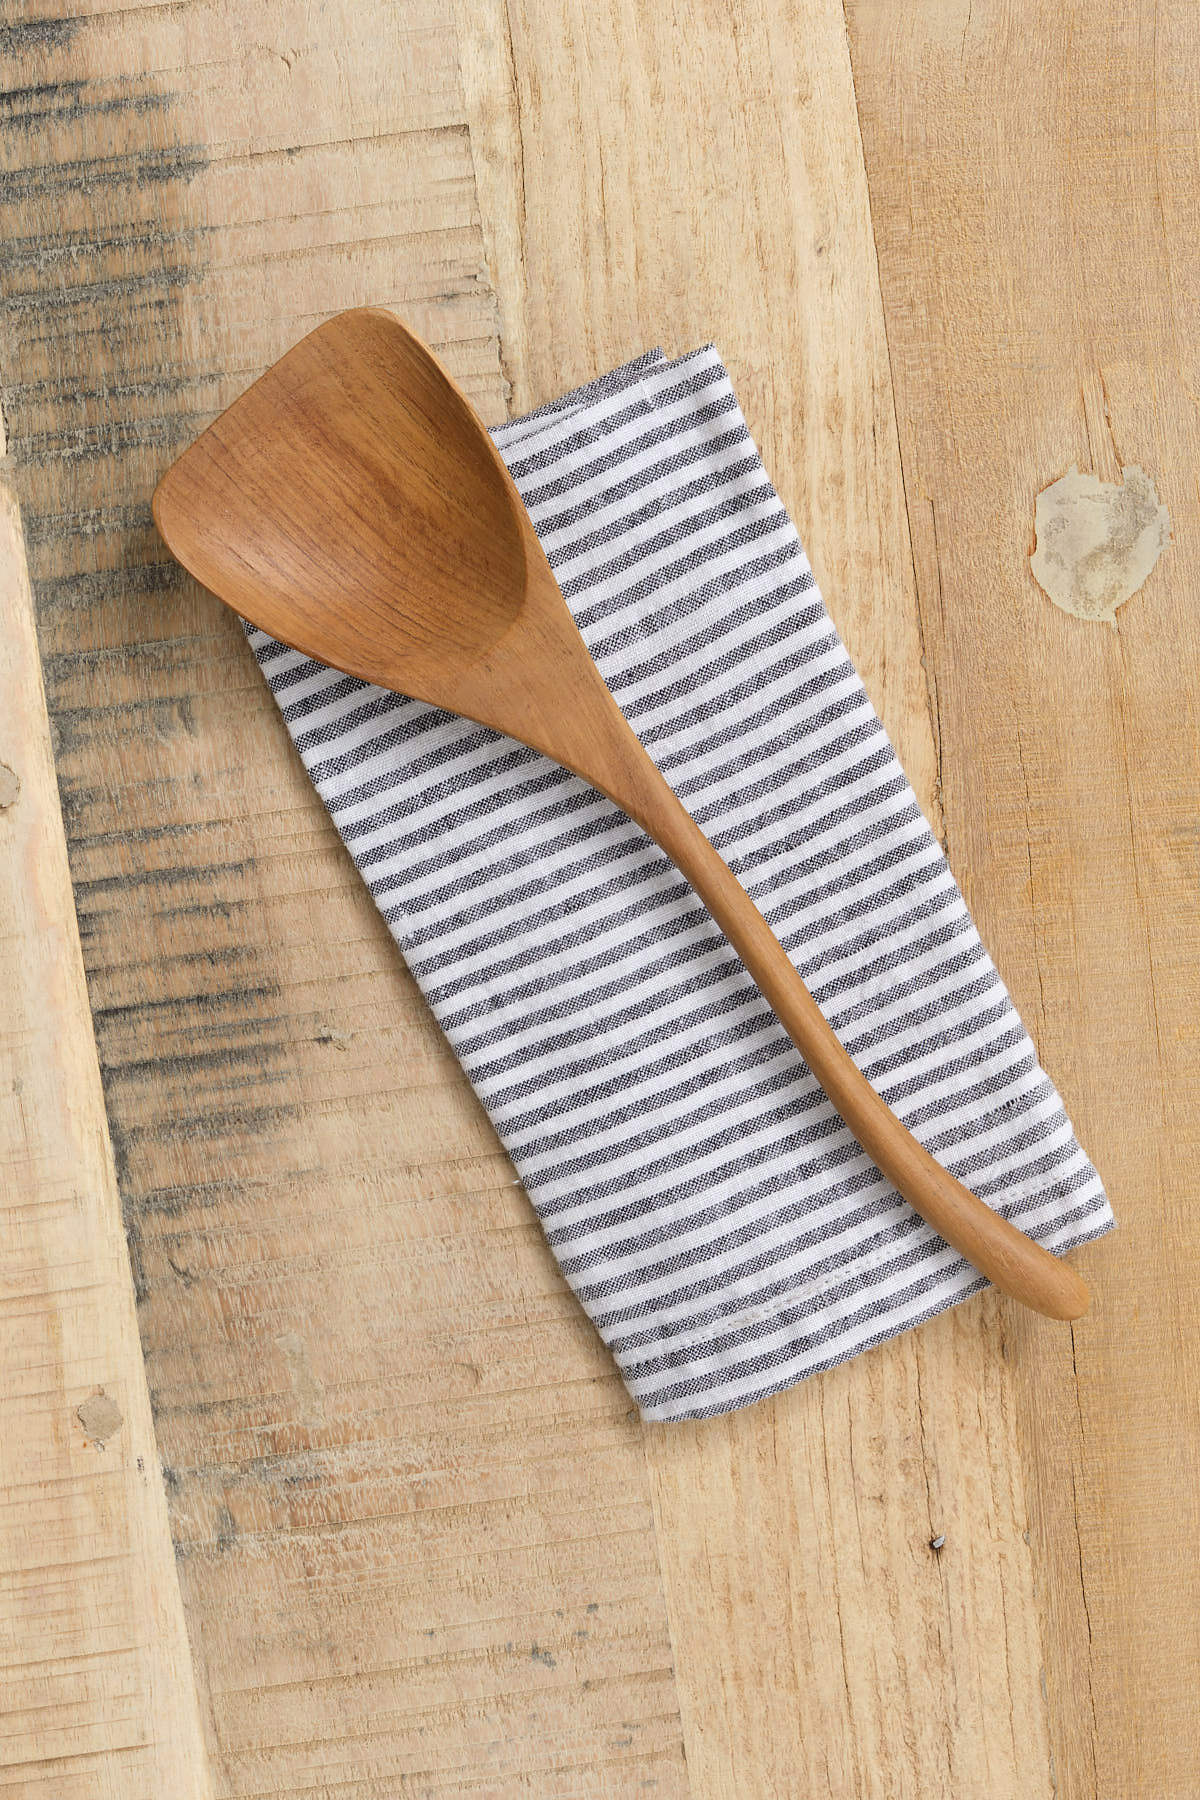 Be Home Teak Spatula with Natural Handle